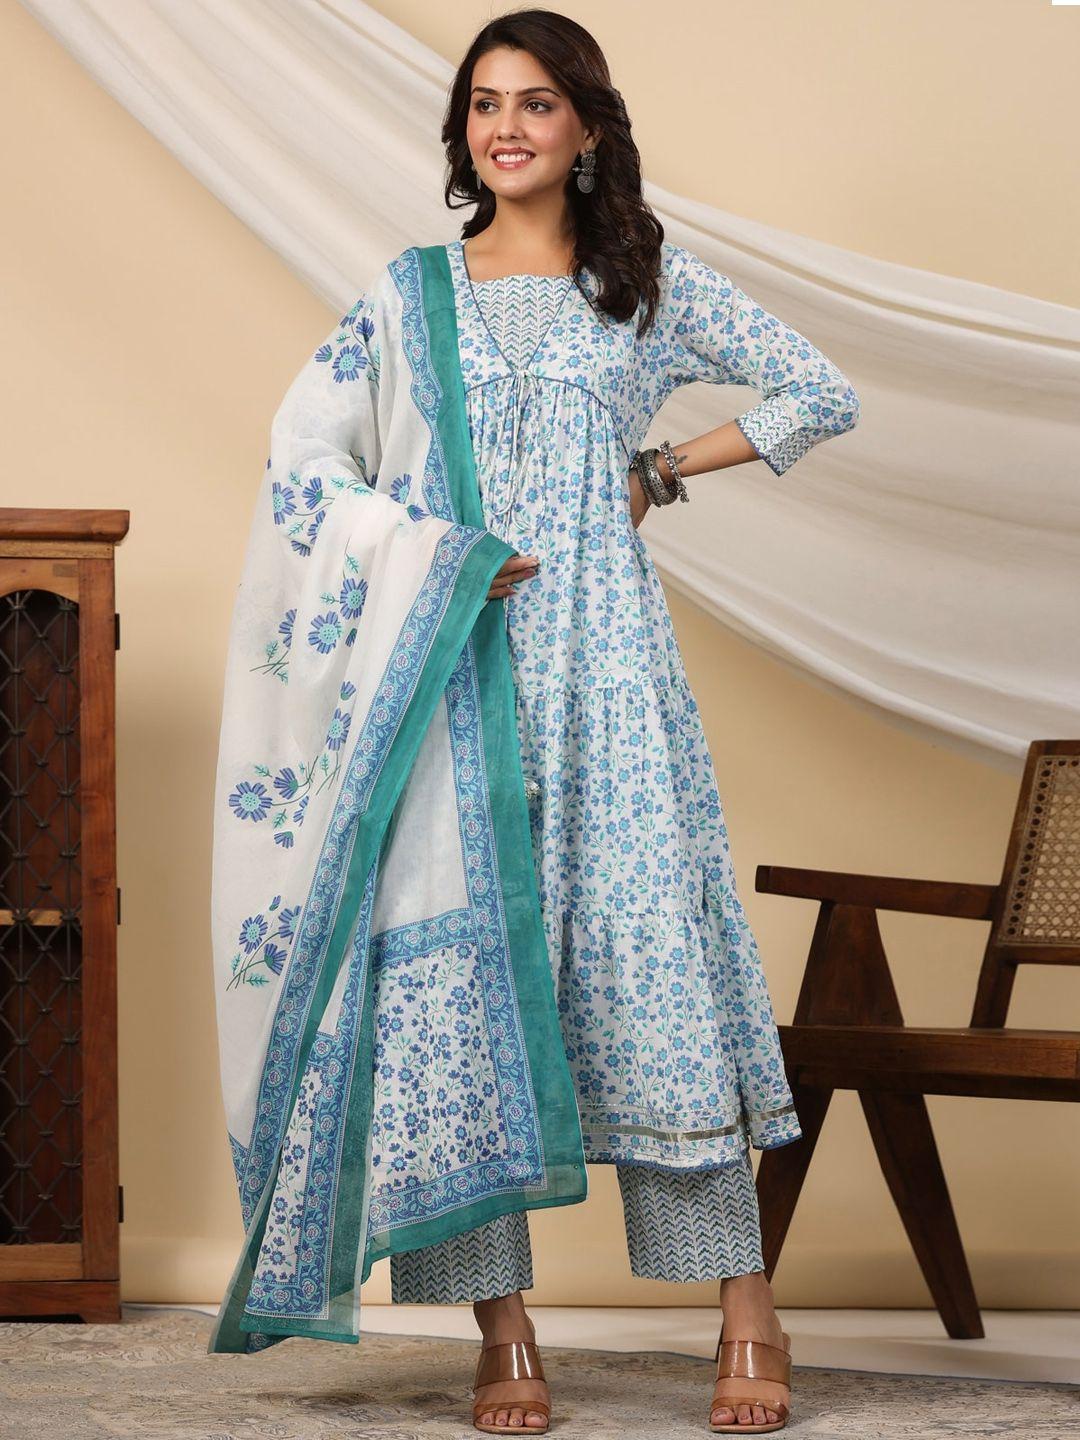 etnicawear floral printed layered pure cotton kurta with palazoos & dupatta